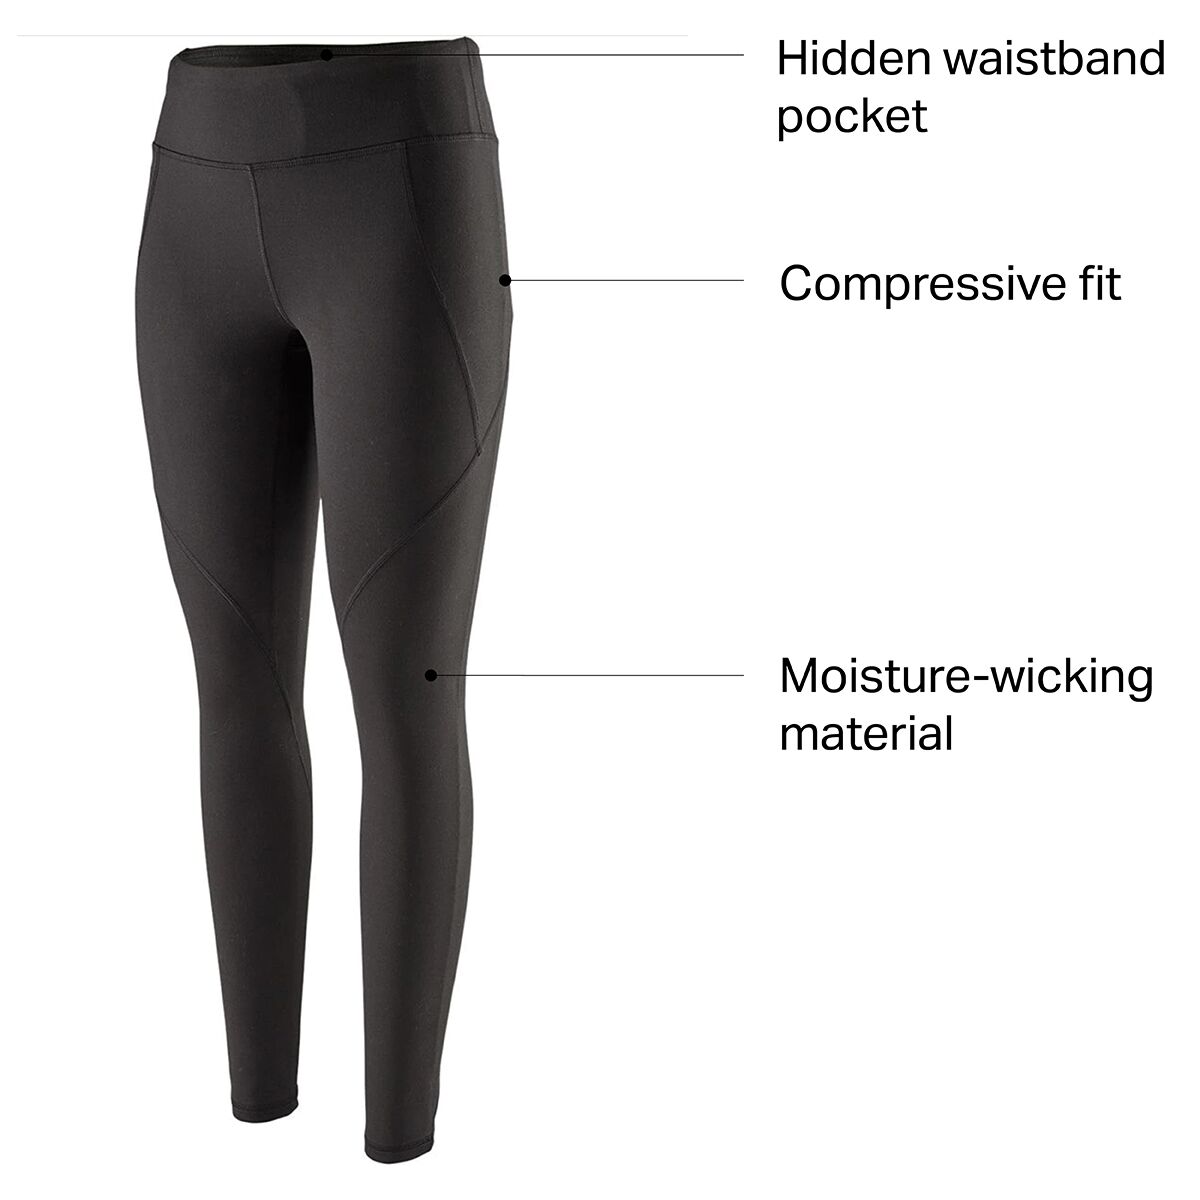 Patagonia W's Centered Tights bei greenality